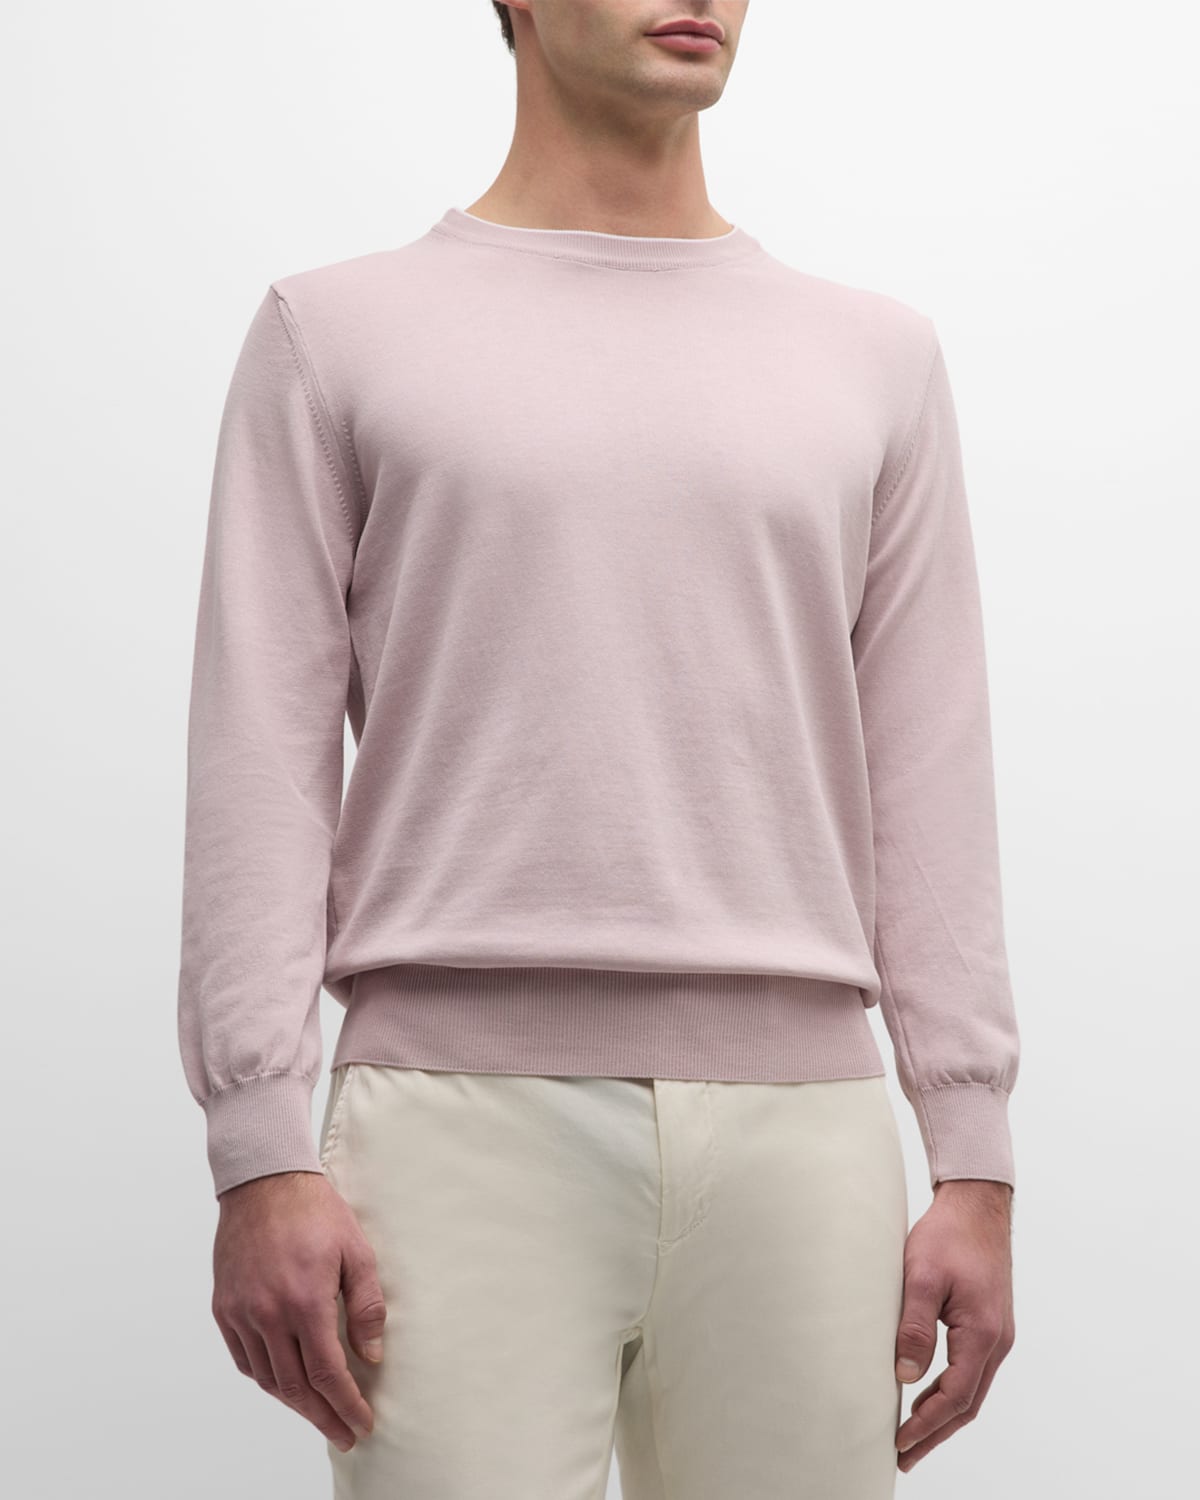 Canali Men's Cotton Crewneck Sweater In Pink